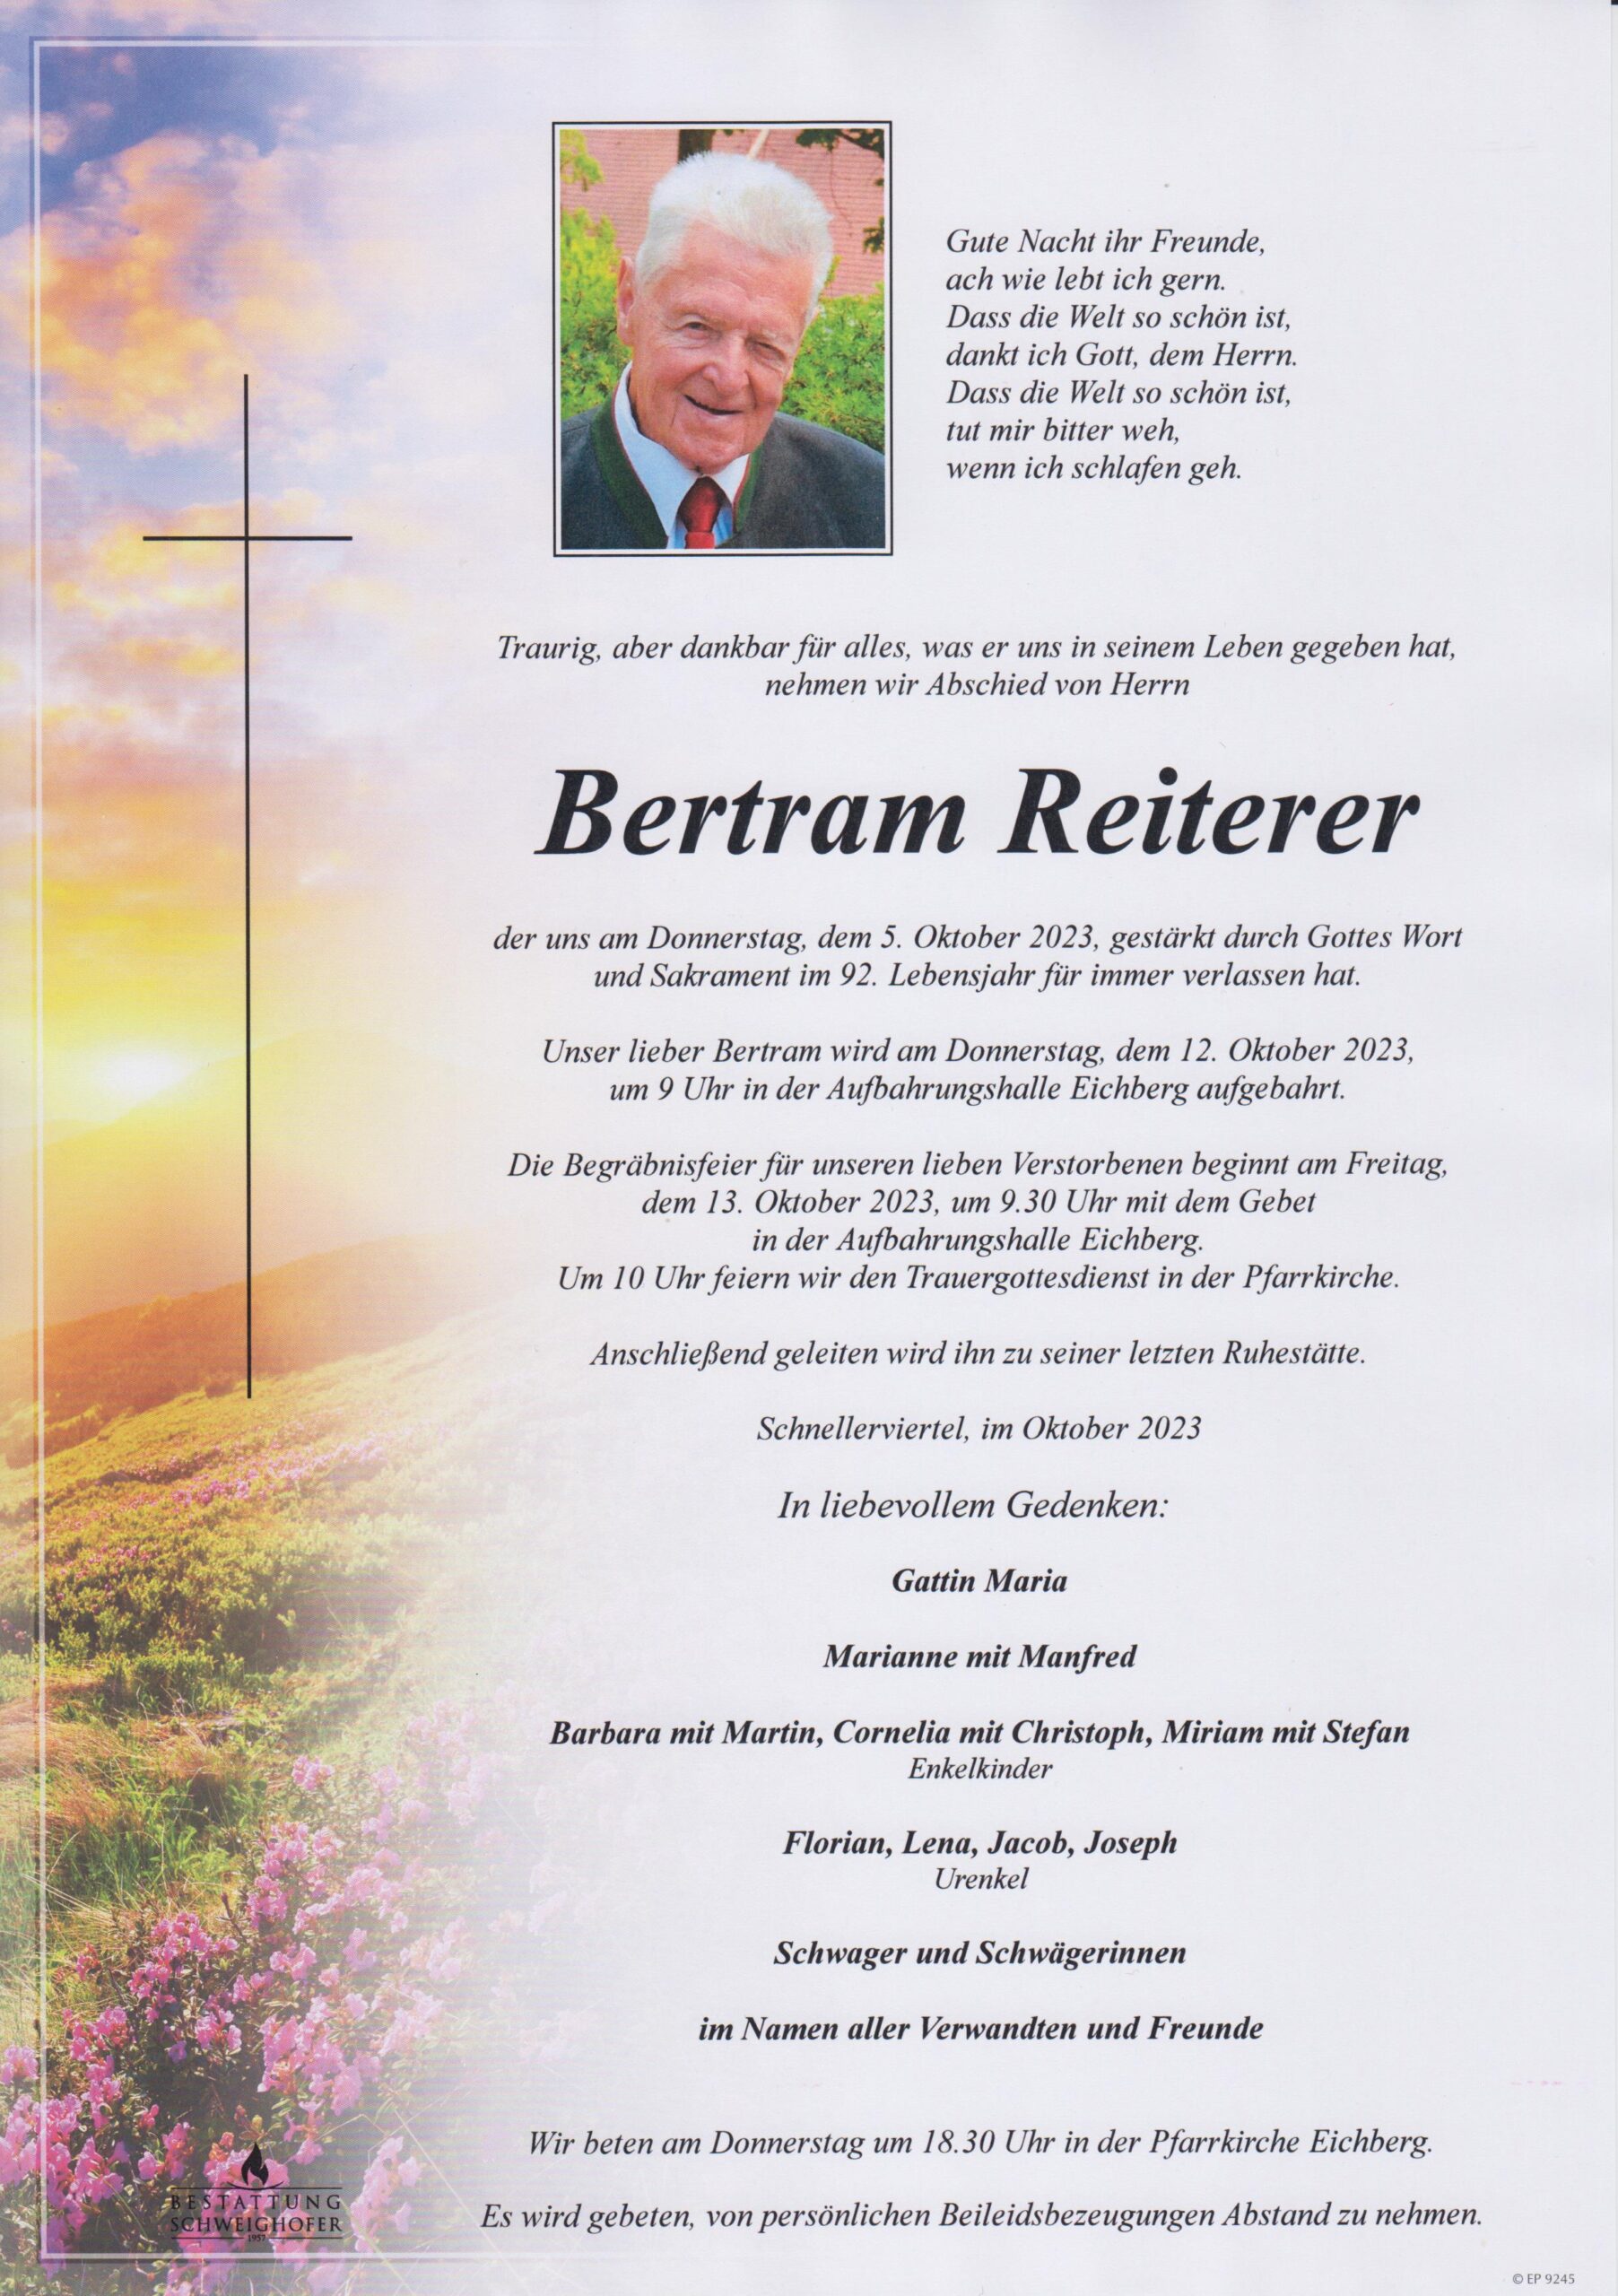 You are currently viewing Bertram Reiterer